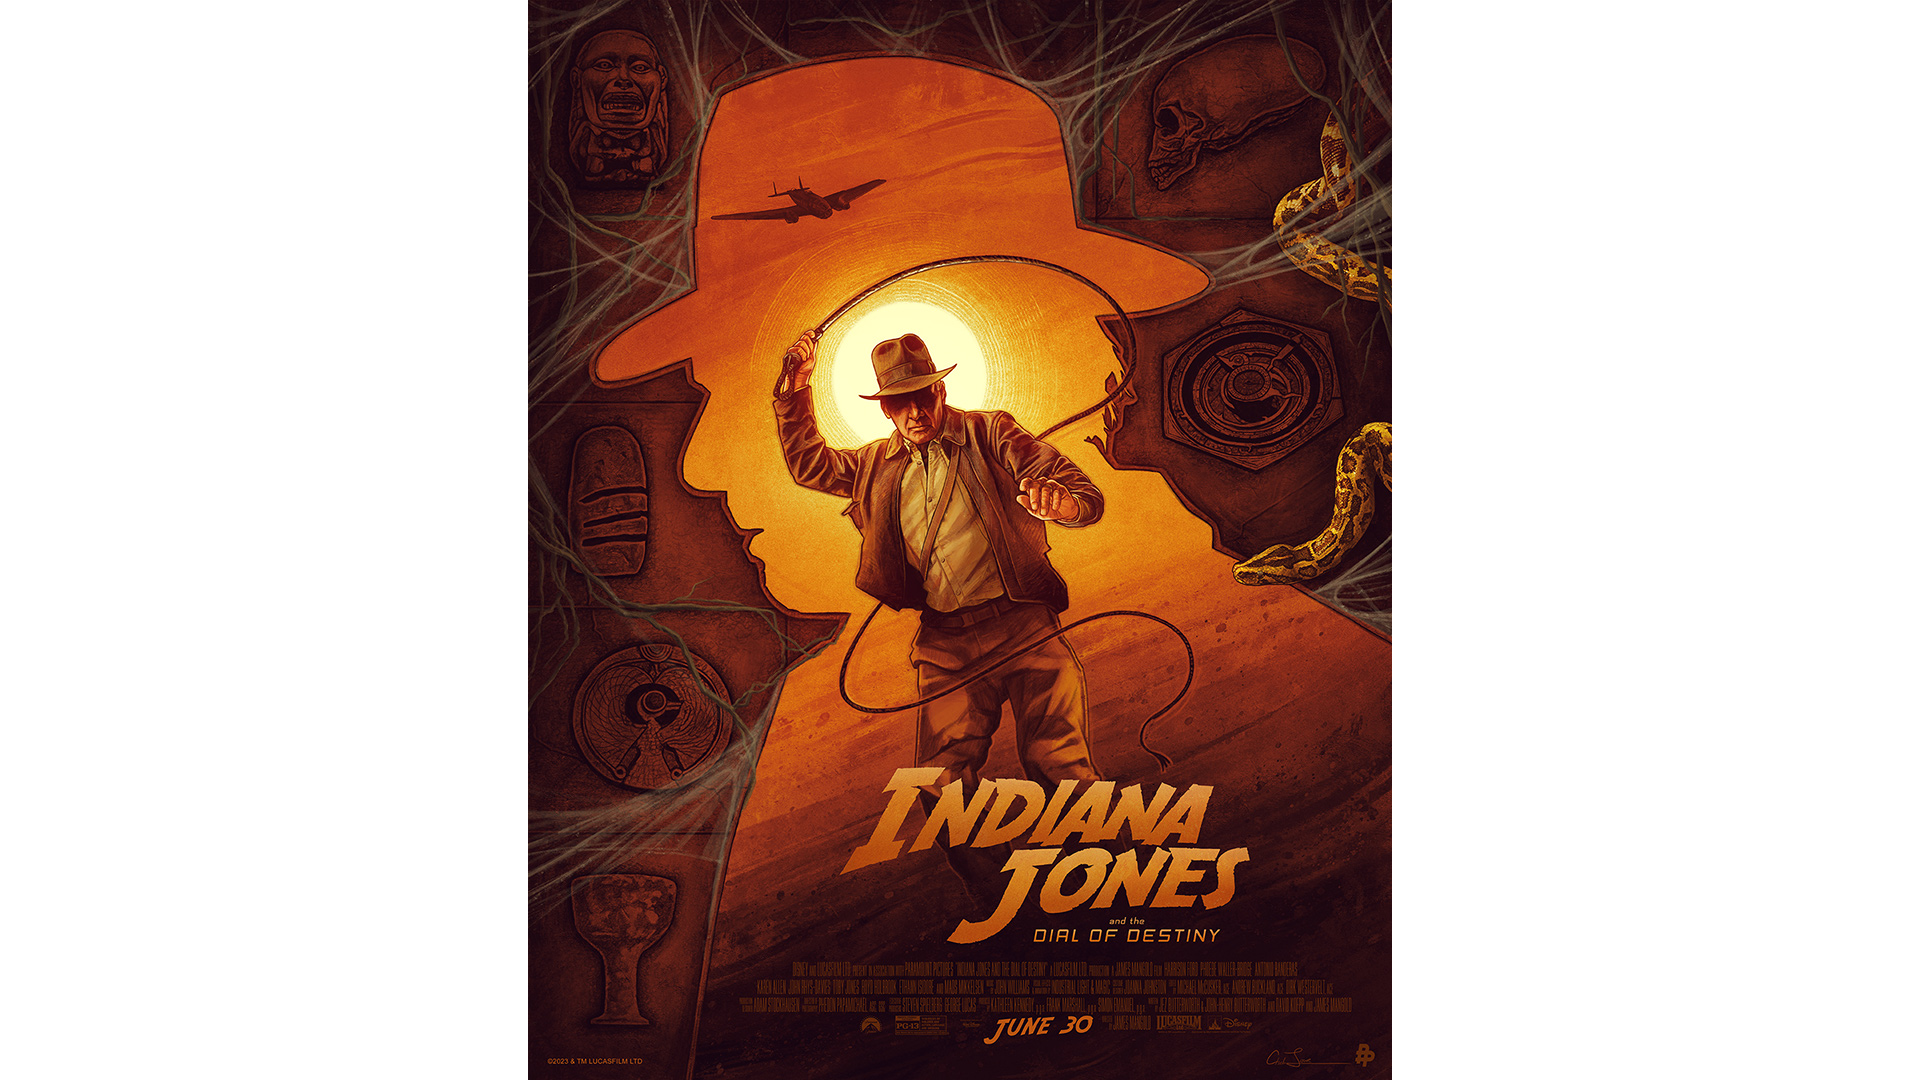 Art by Chelsea Lowe inspired by Indiana Jones and the Dial of Destiny.